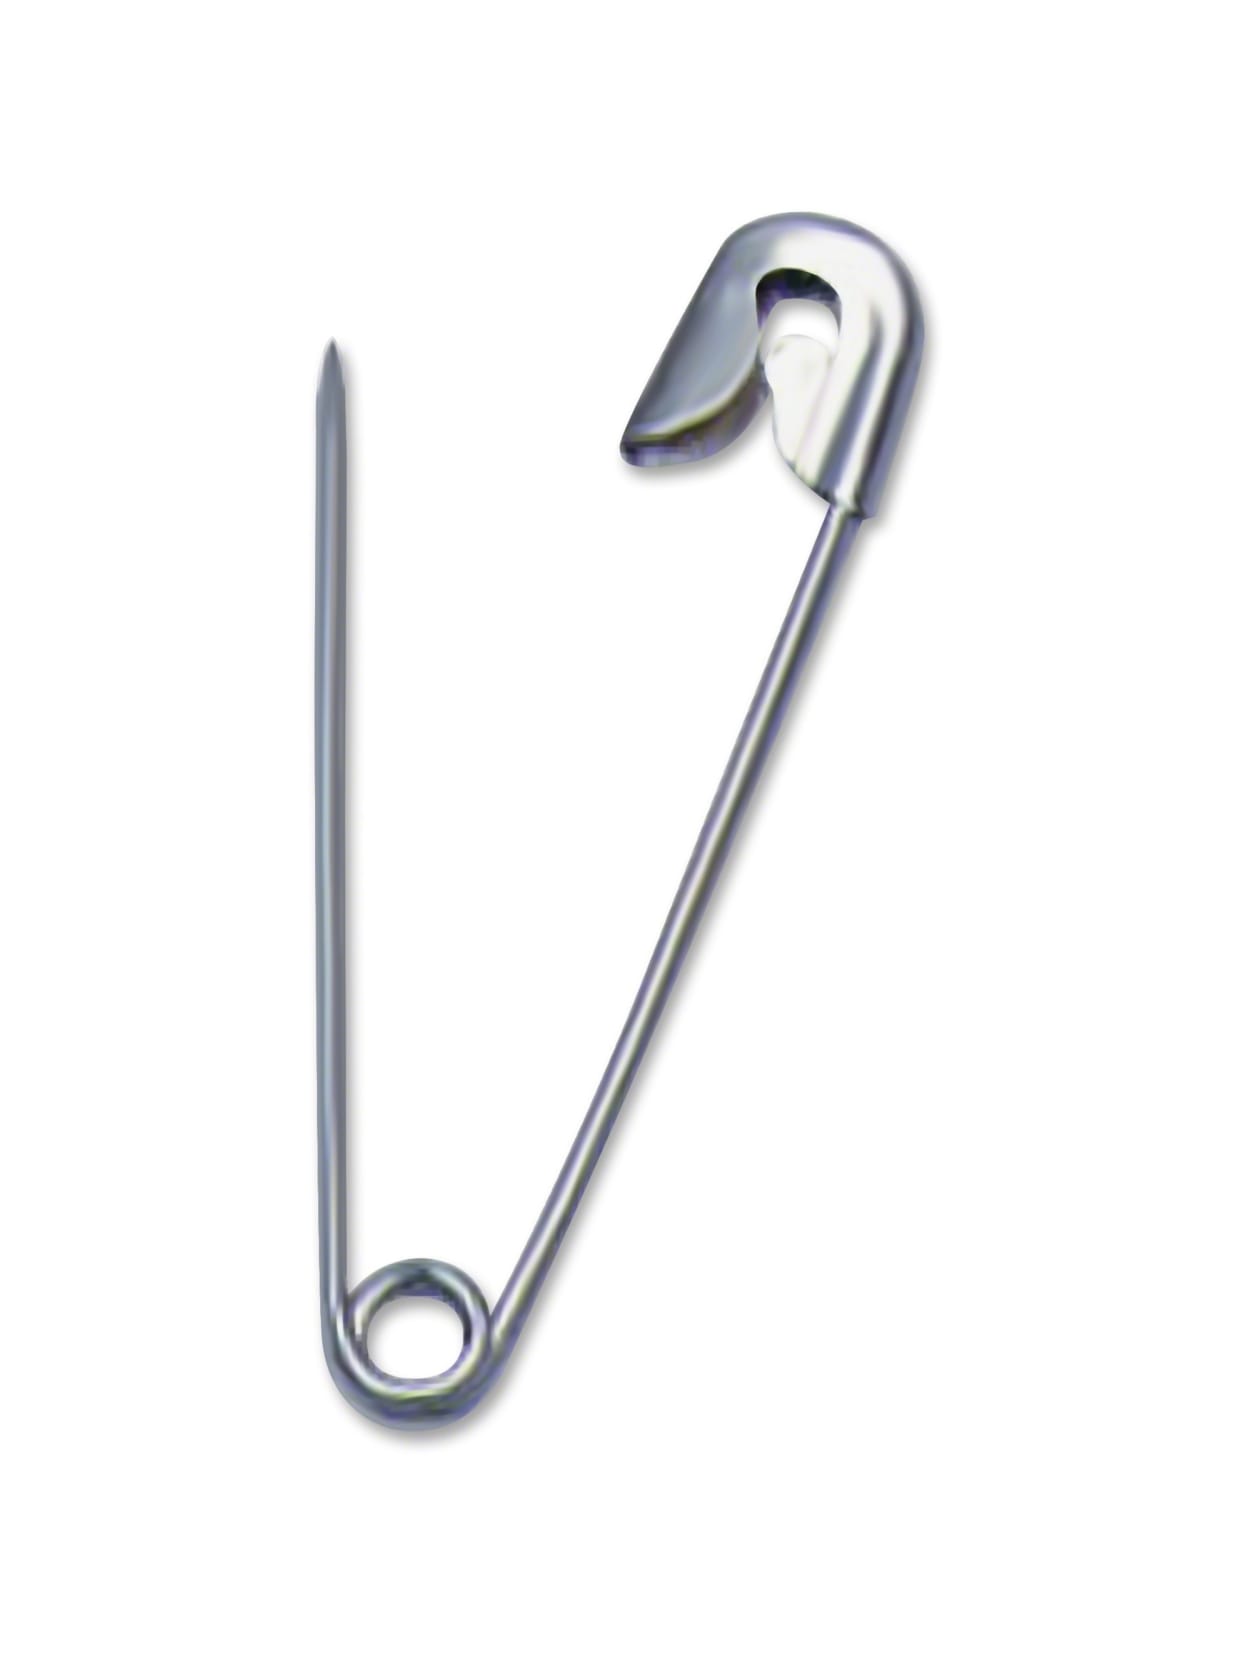 the safety pin